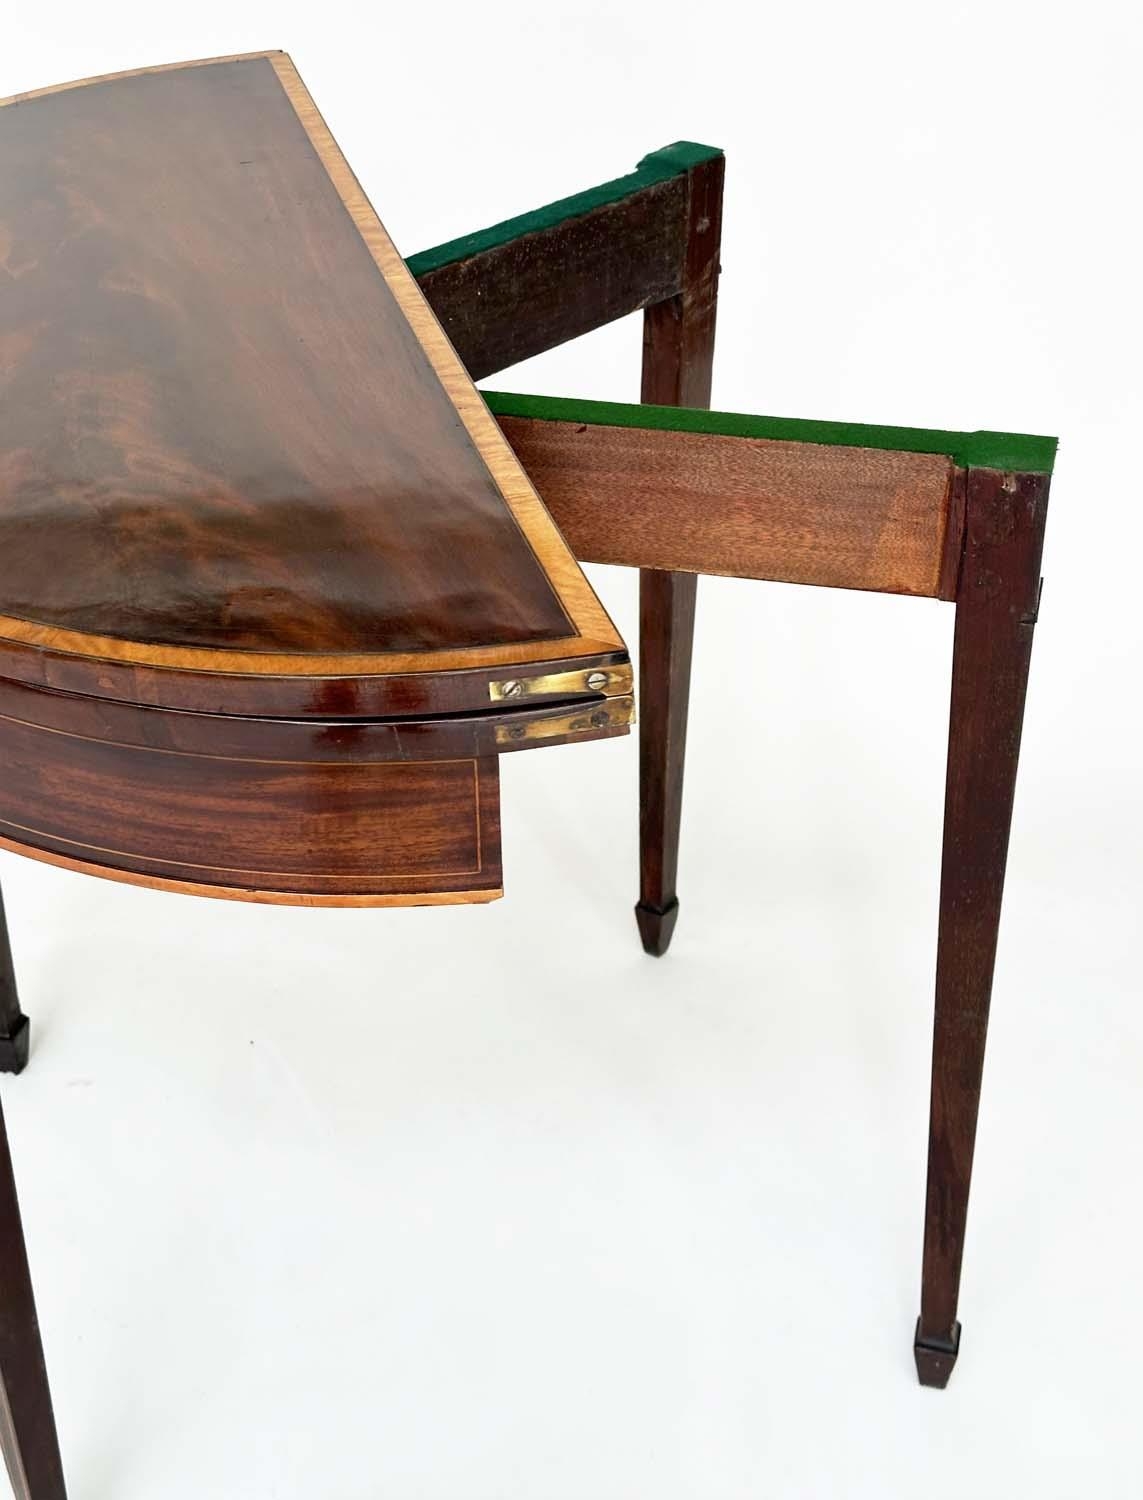 CARD TABLE, George III flame mahogany and satinwood crossbanded, demilune foldover baise lined, 90cm - Image 12 of 12